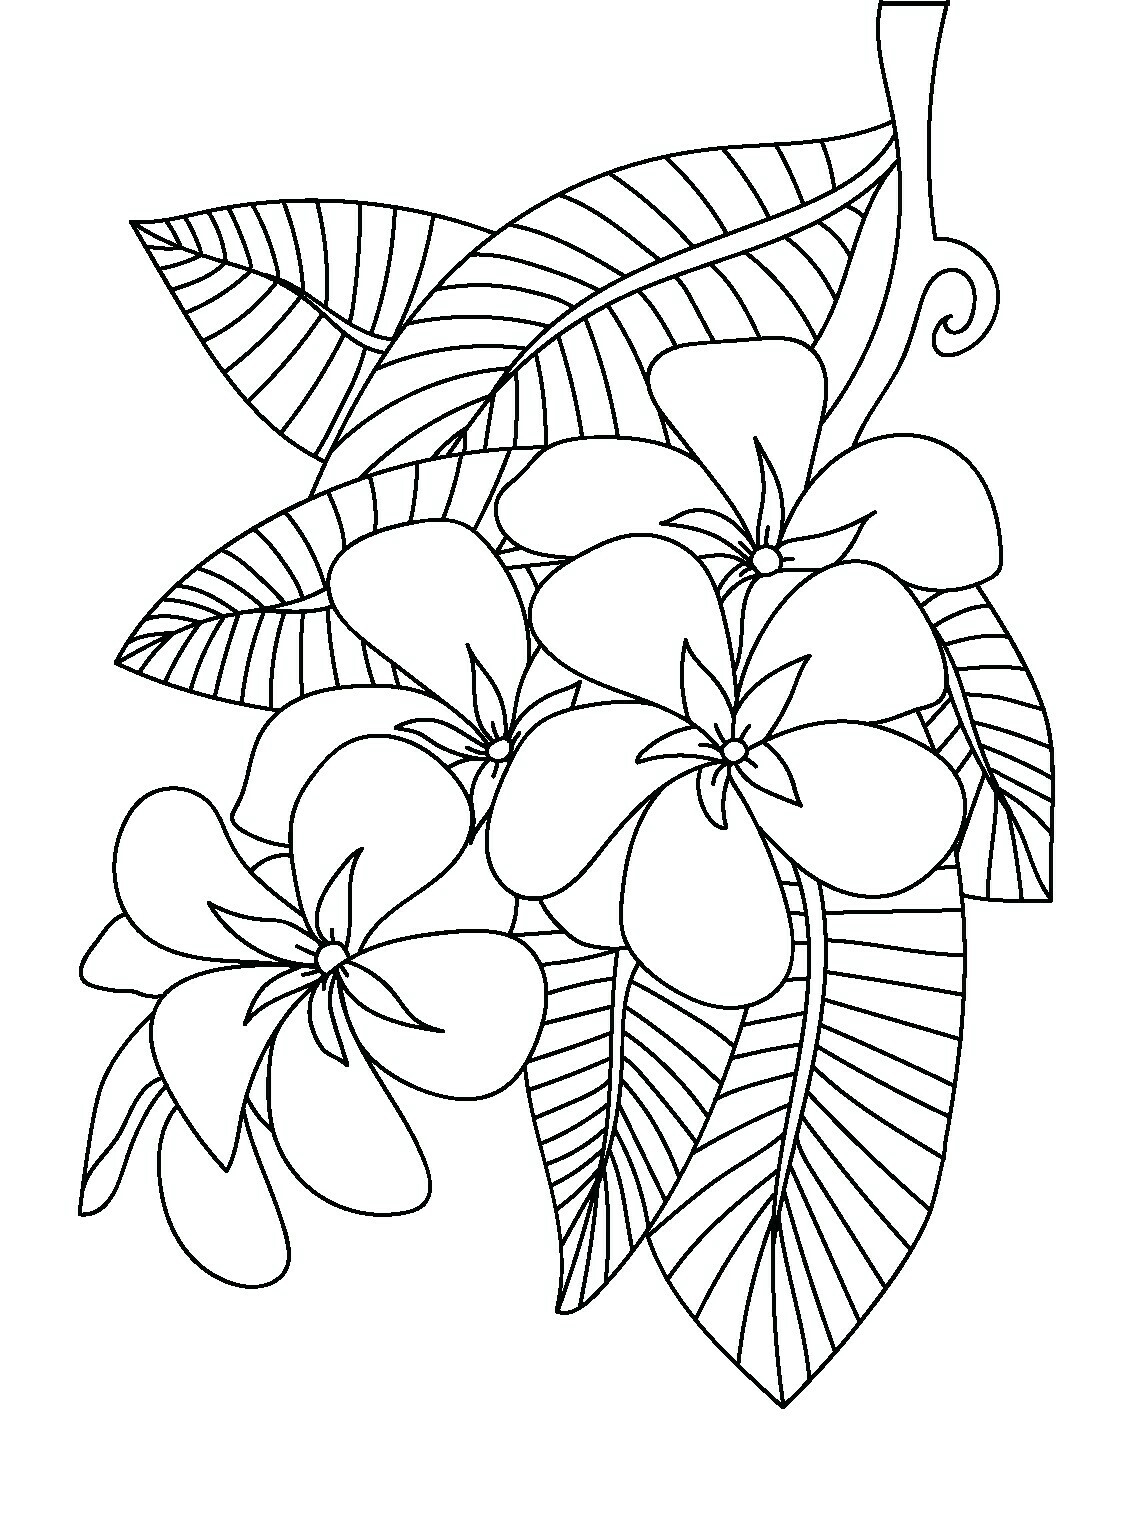 Peony Coloring Page at GetColorings.com | Free printable colorings